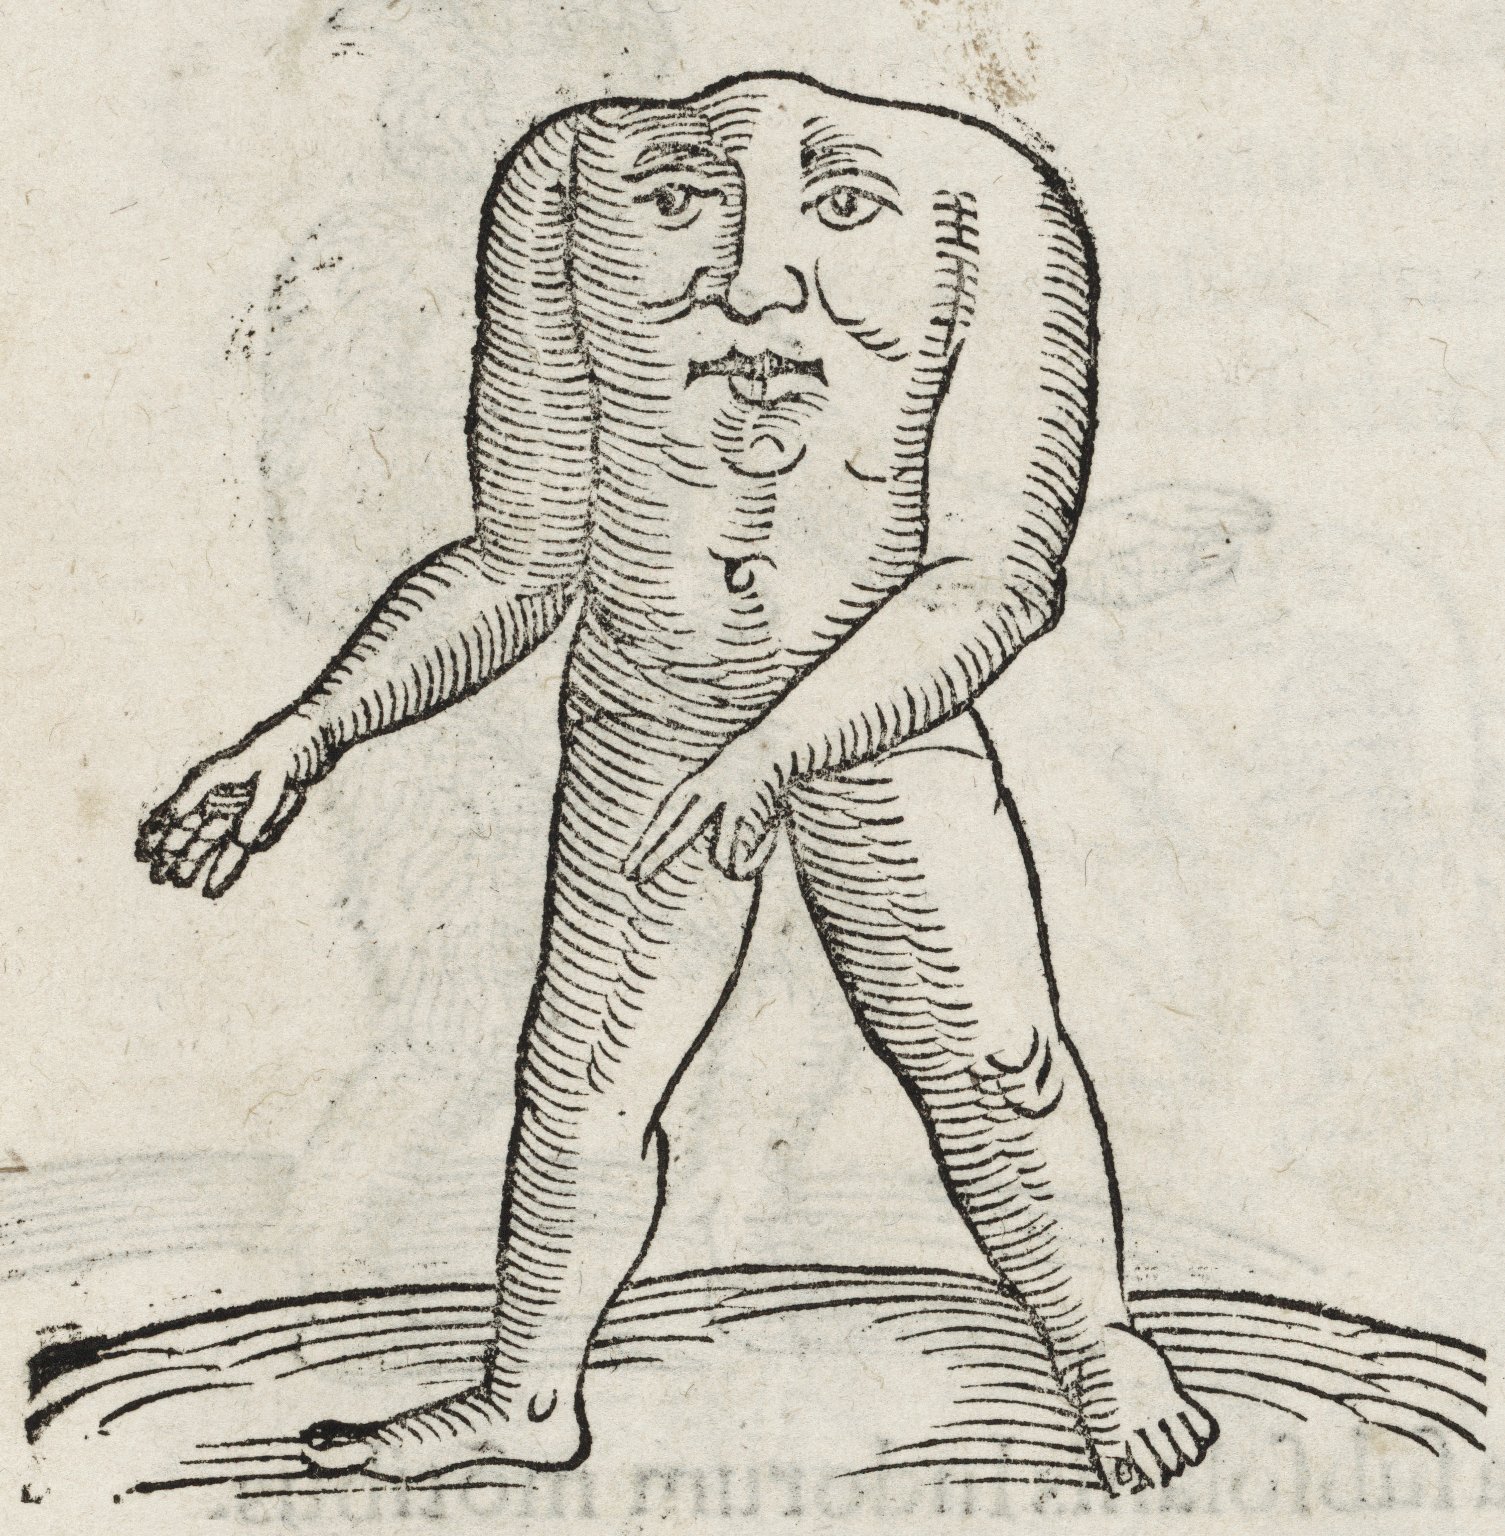 A man with his face on his chest between his shoulders. He has no neck or head. Image Citation: Konran Lykosthenes (1518-1561). Prodigiorum (Basel 1557), page 9. Call #: GR825 L8 1557 Cage. Used by permission of the Folger Shakespeare Library under a Creative Commons Attribution-ShareAlike 4.0 International License.